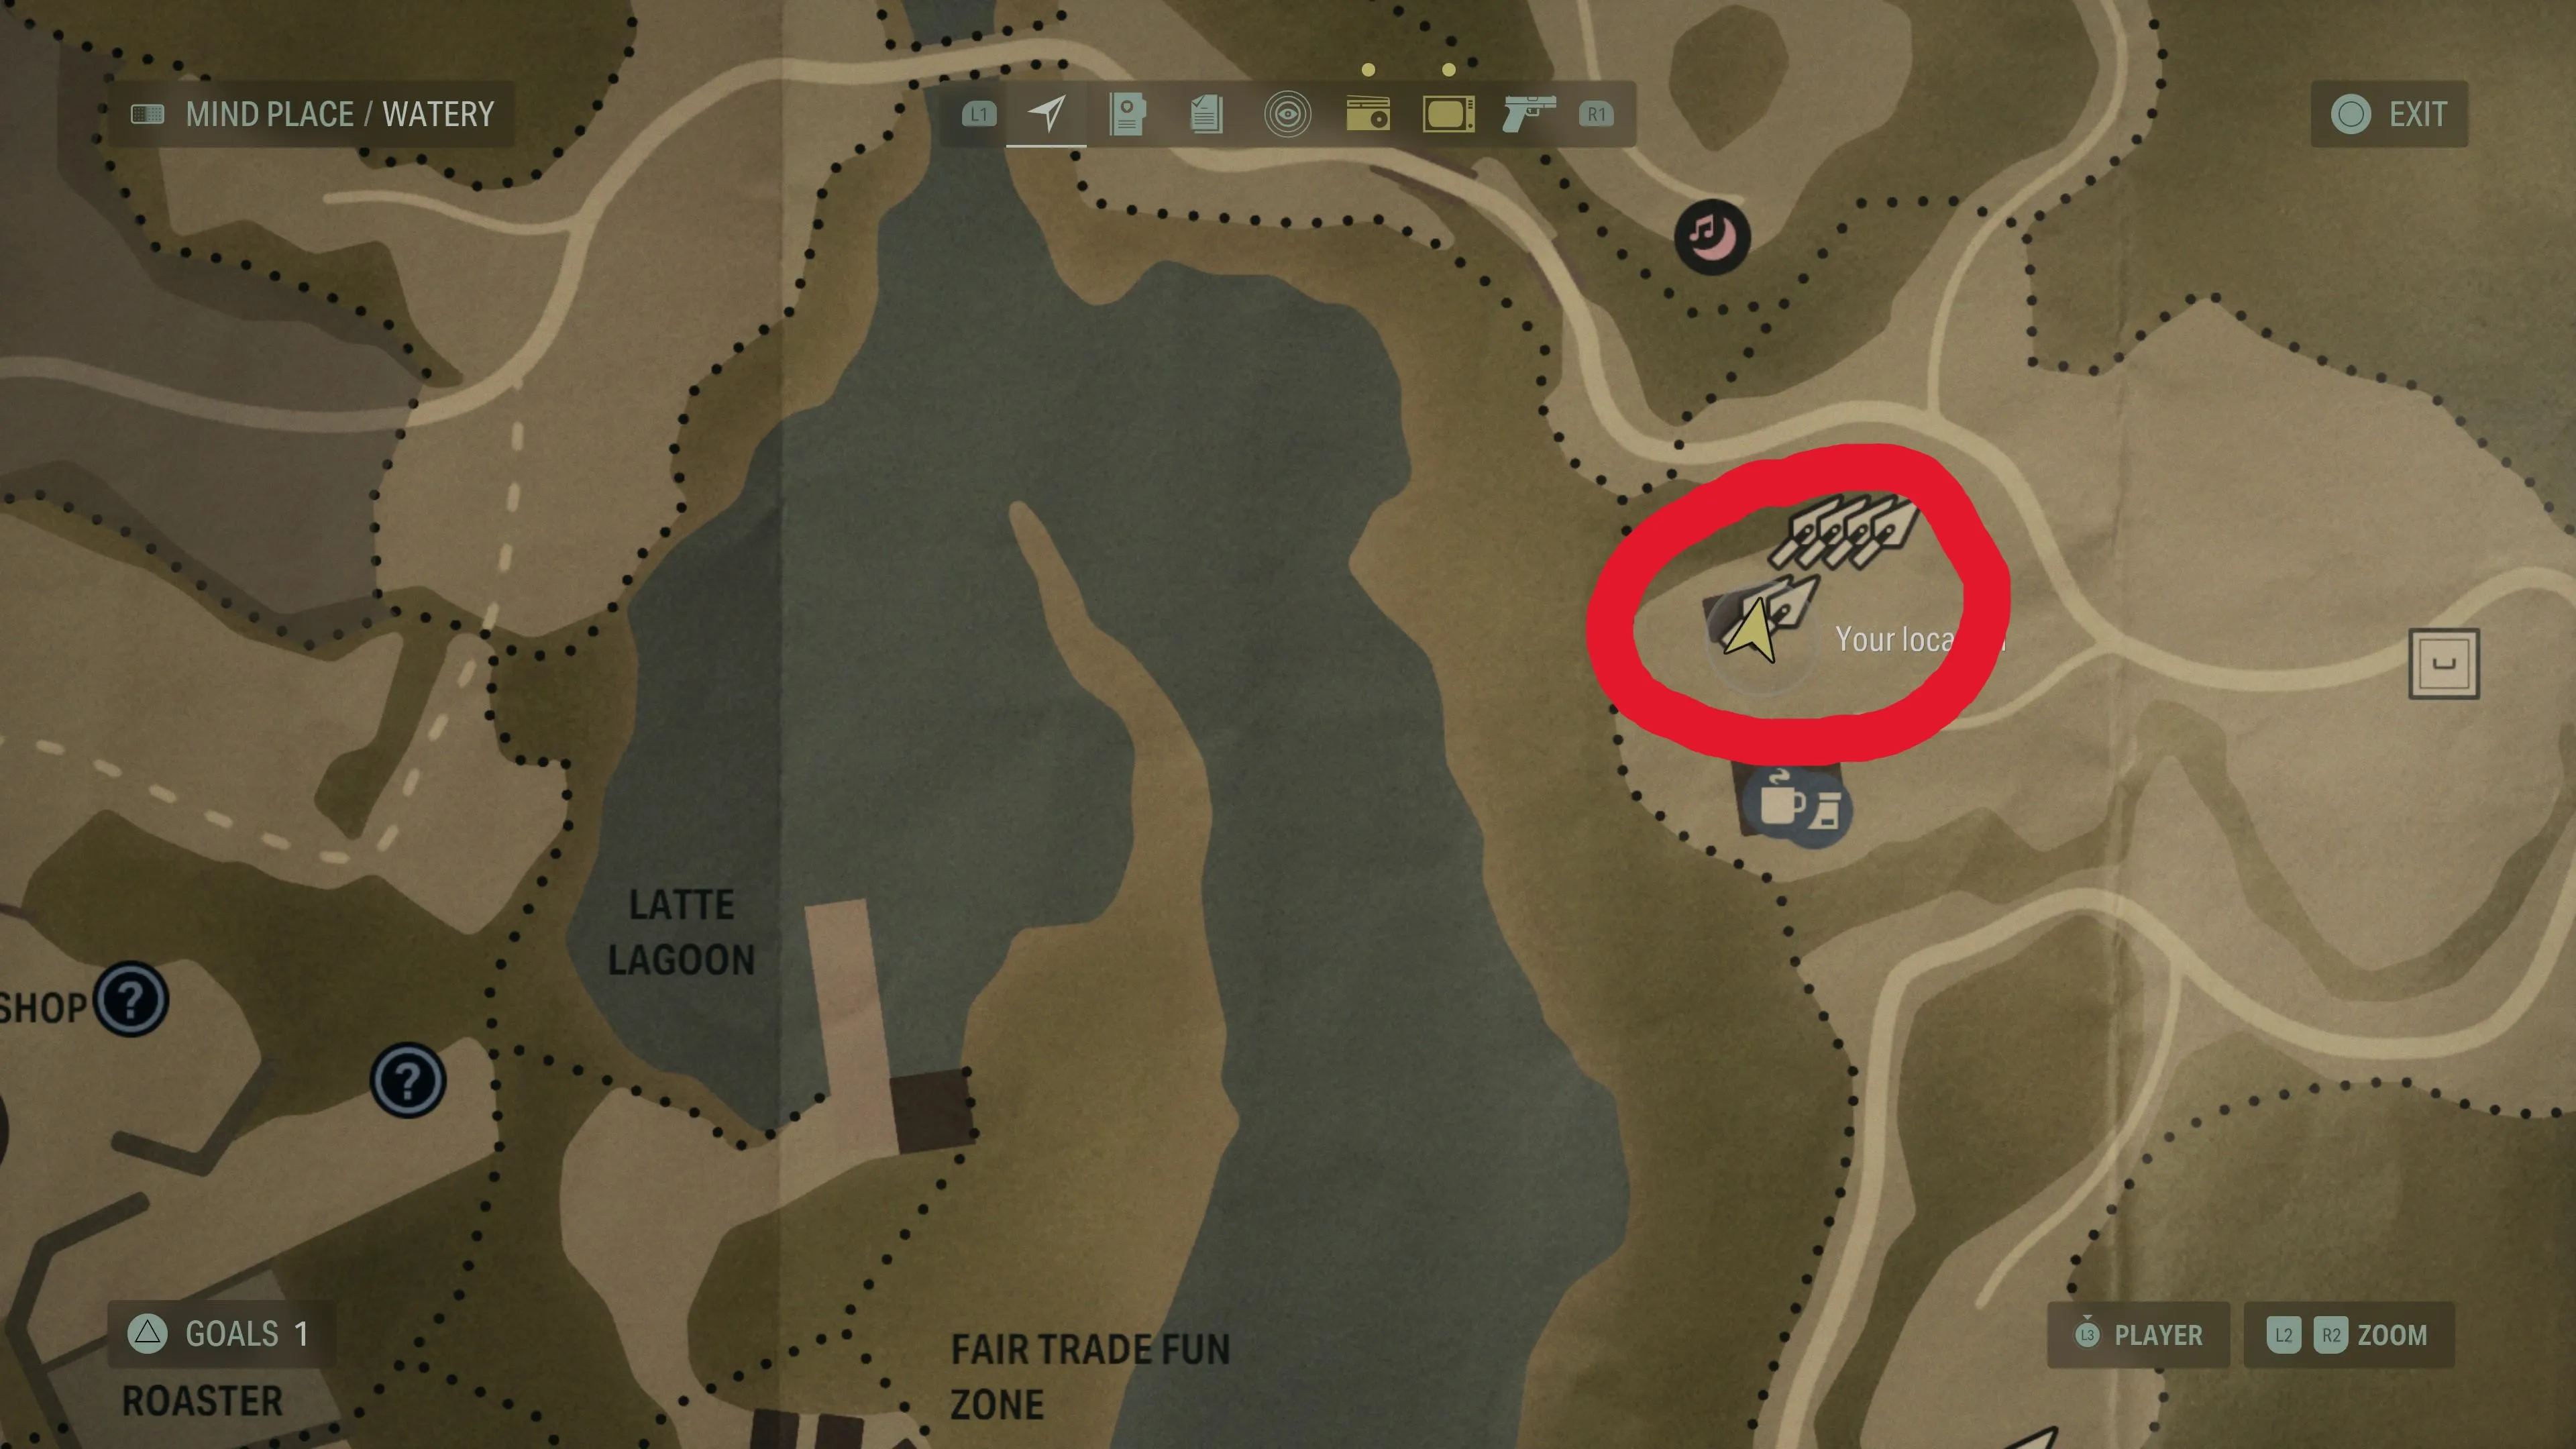 Crossbow Cultish Stash location circled on map